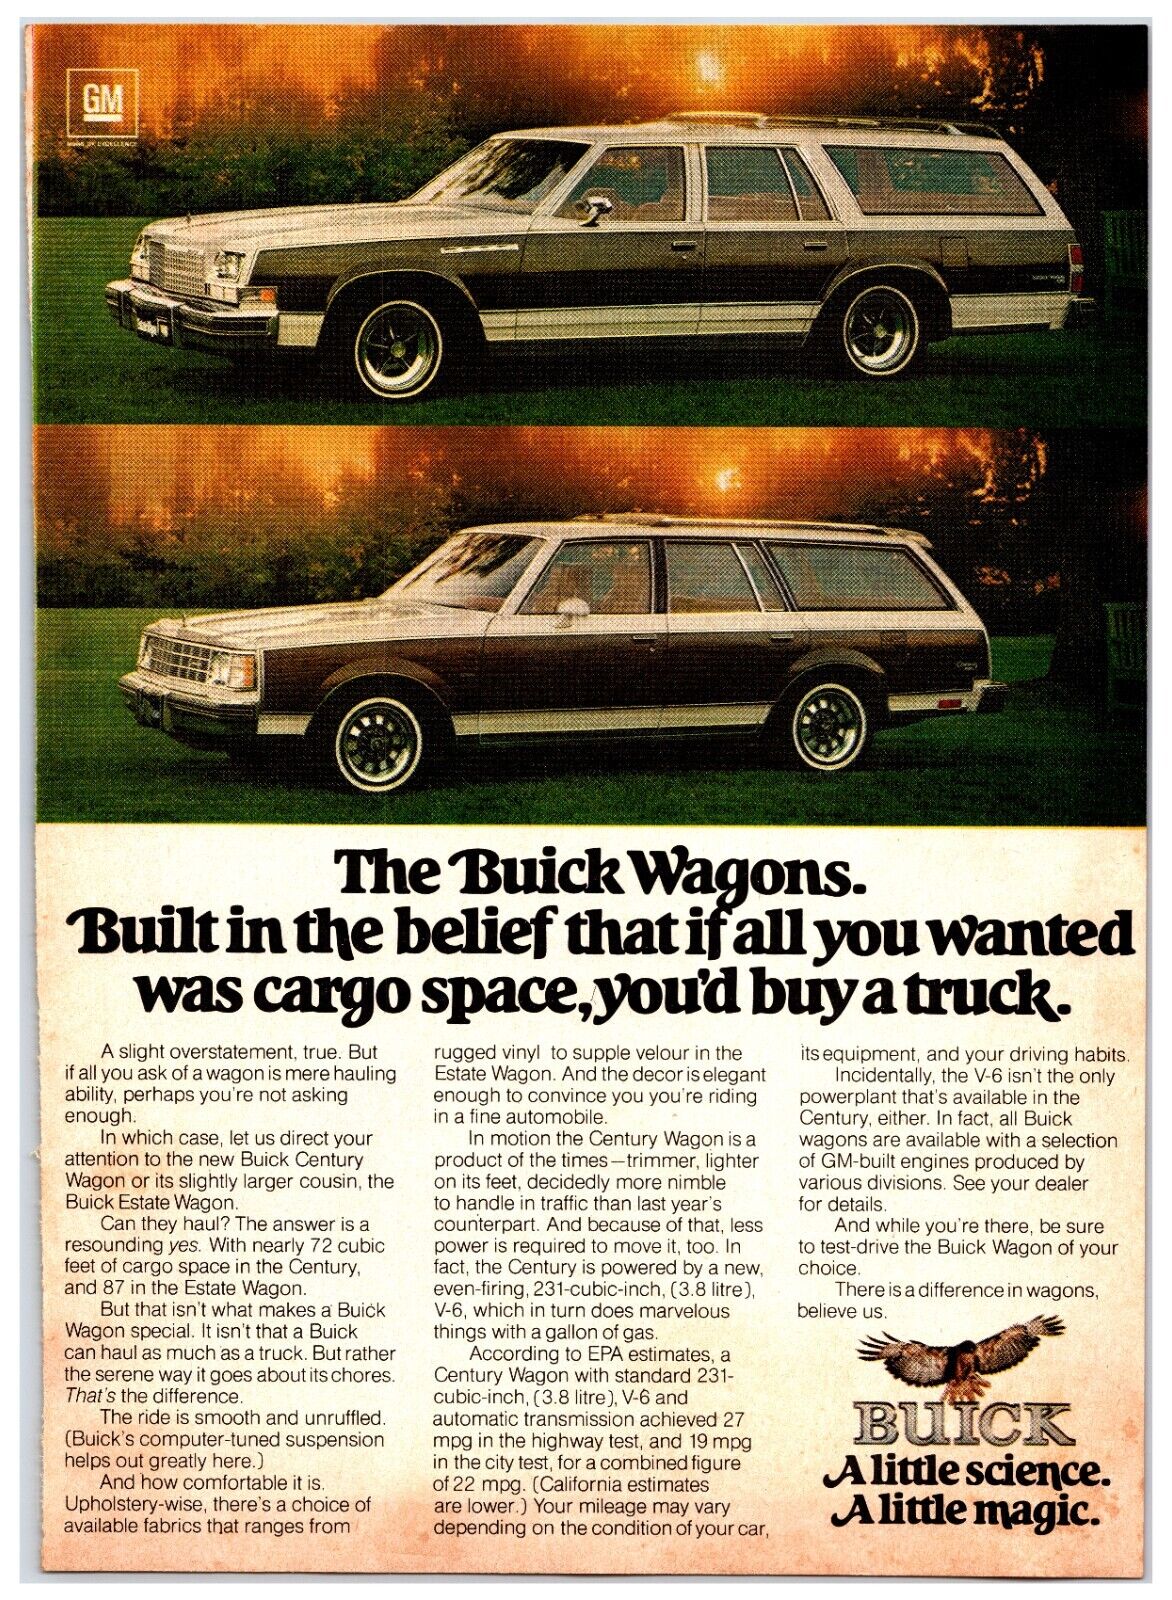 1978 Buick Wagons Car - Original Print Ad (8in x 11in) - Vintage Advertisement